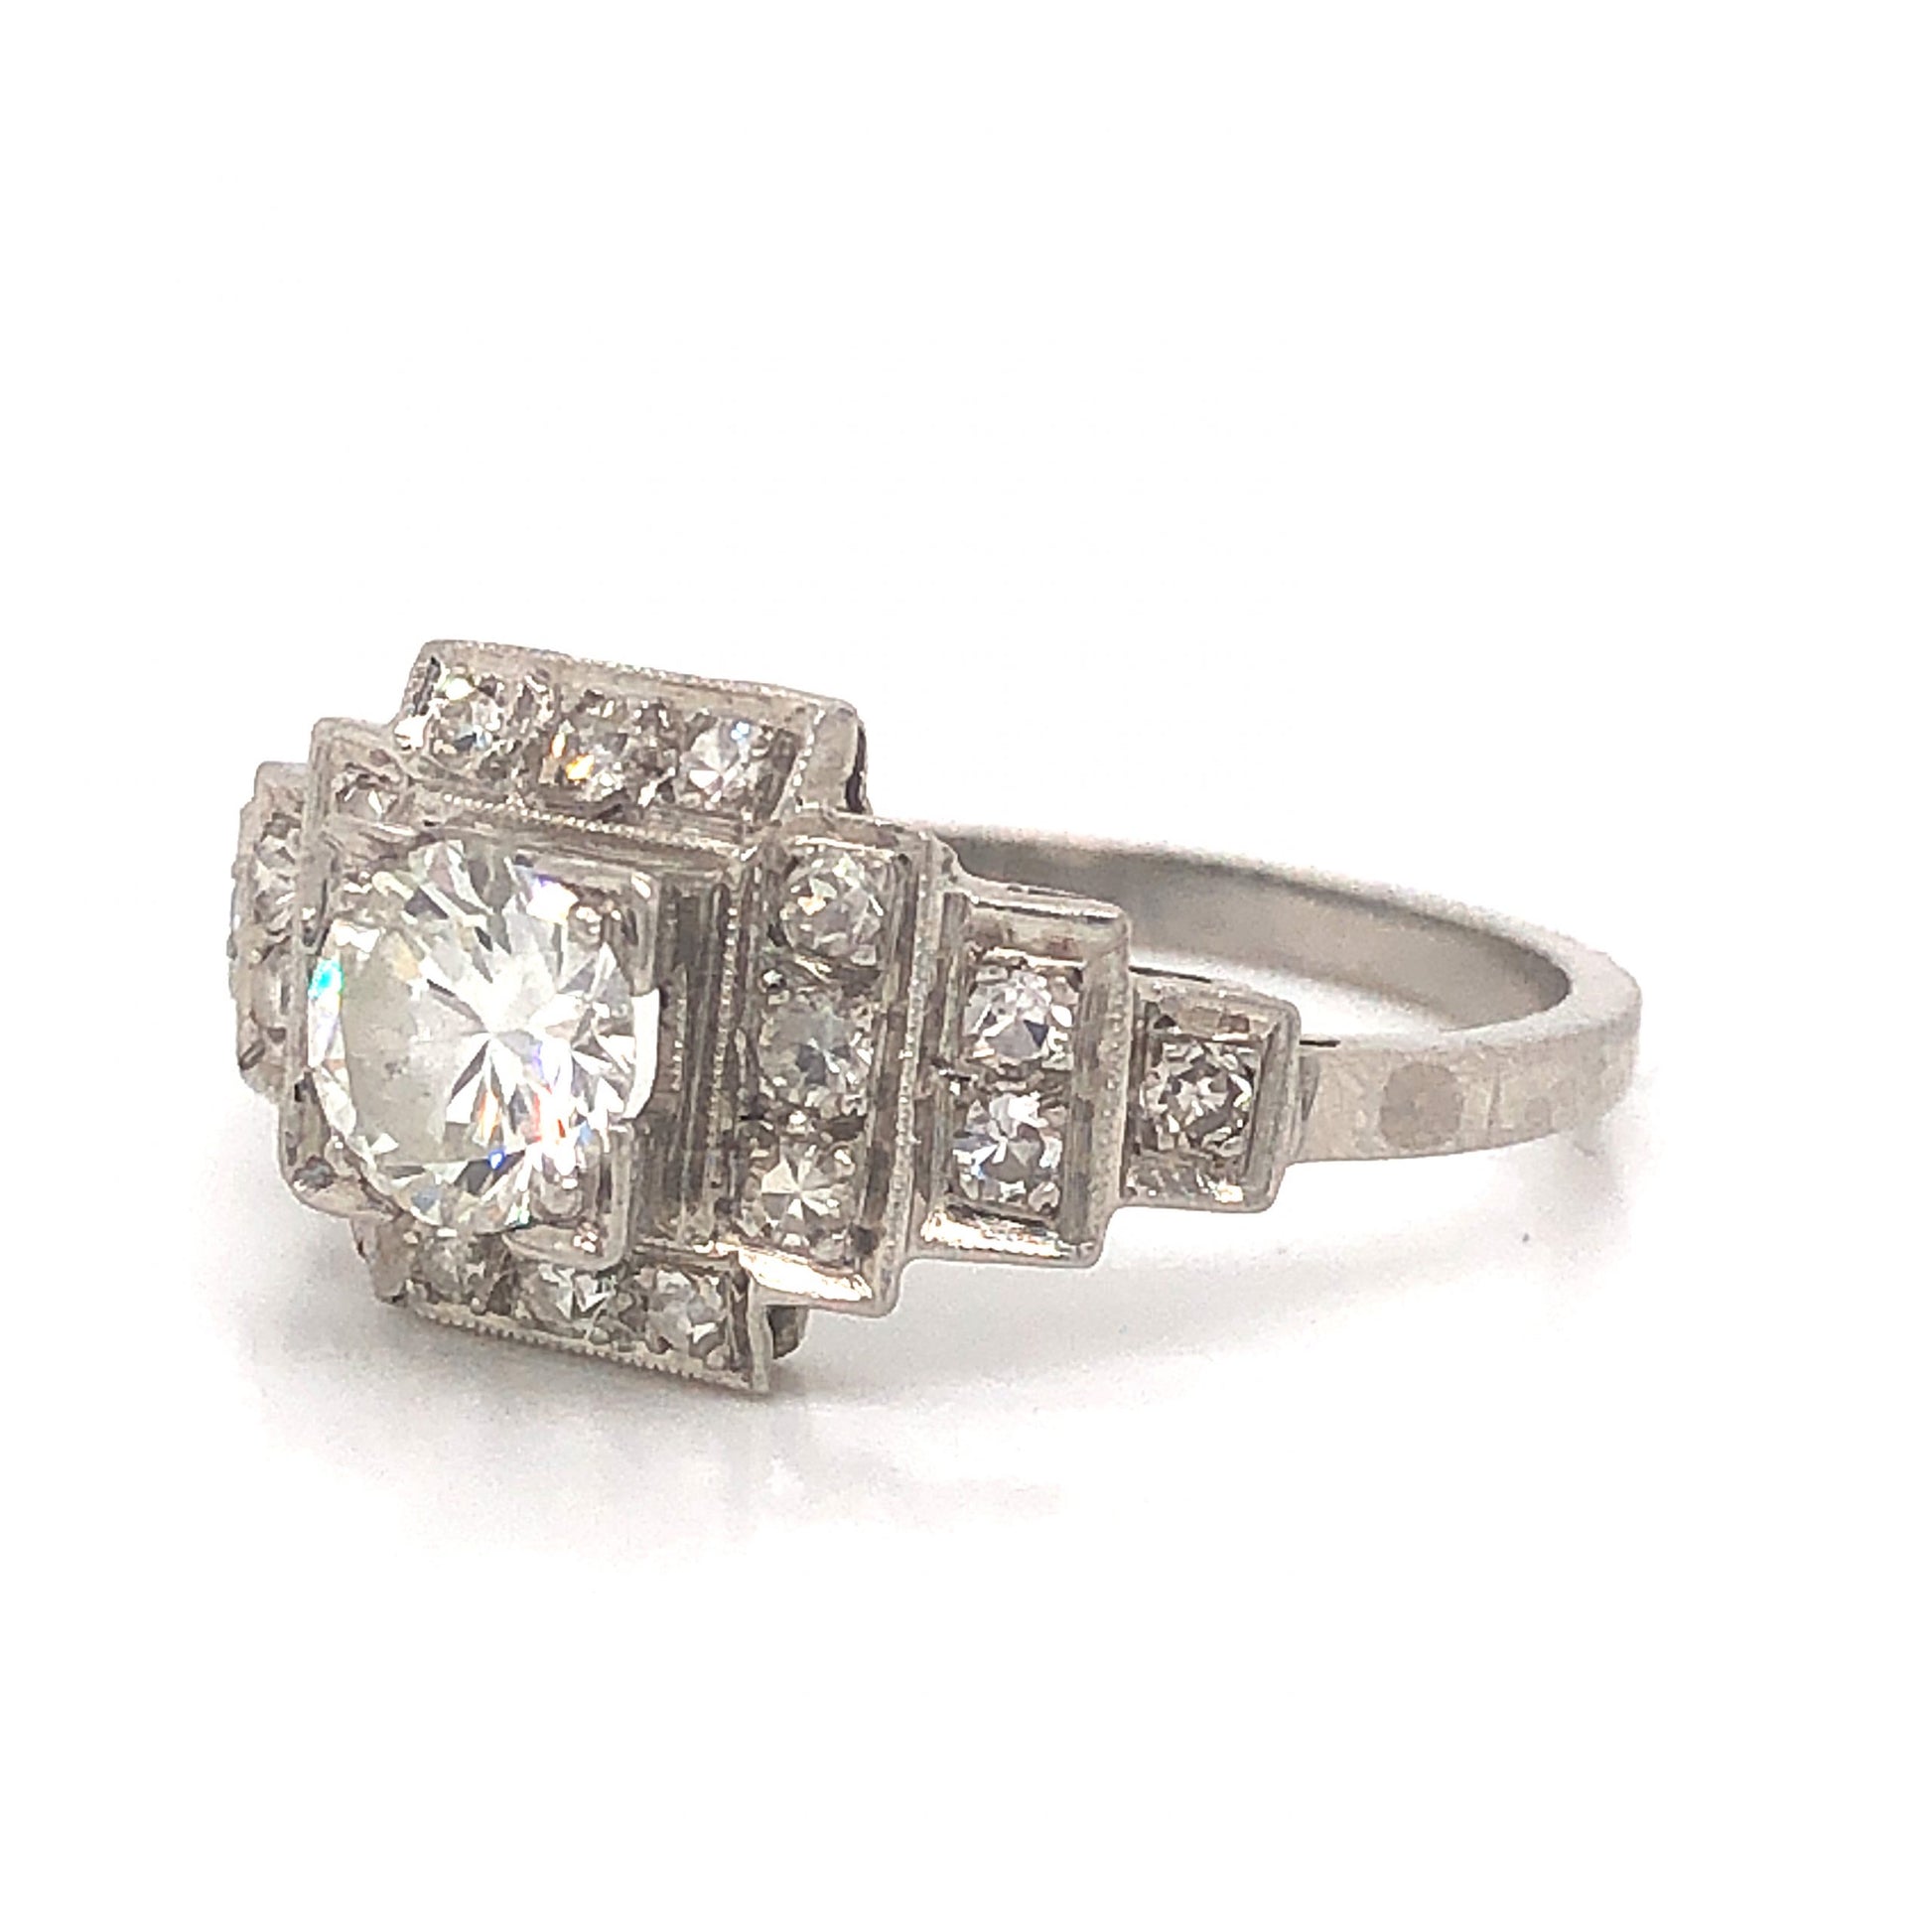 .52 Art Deco Diamond Engagement Ring in PlatinumComposition: Platinum Ring Size: 7.25 Total Diamond Weight: .82ct Total Gram Weight: 3.0 g Inscription: 1860 PLAT 10% IRID
      